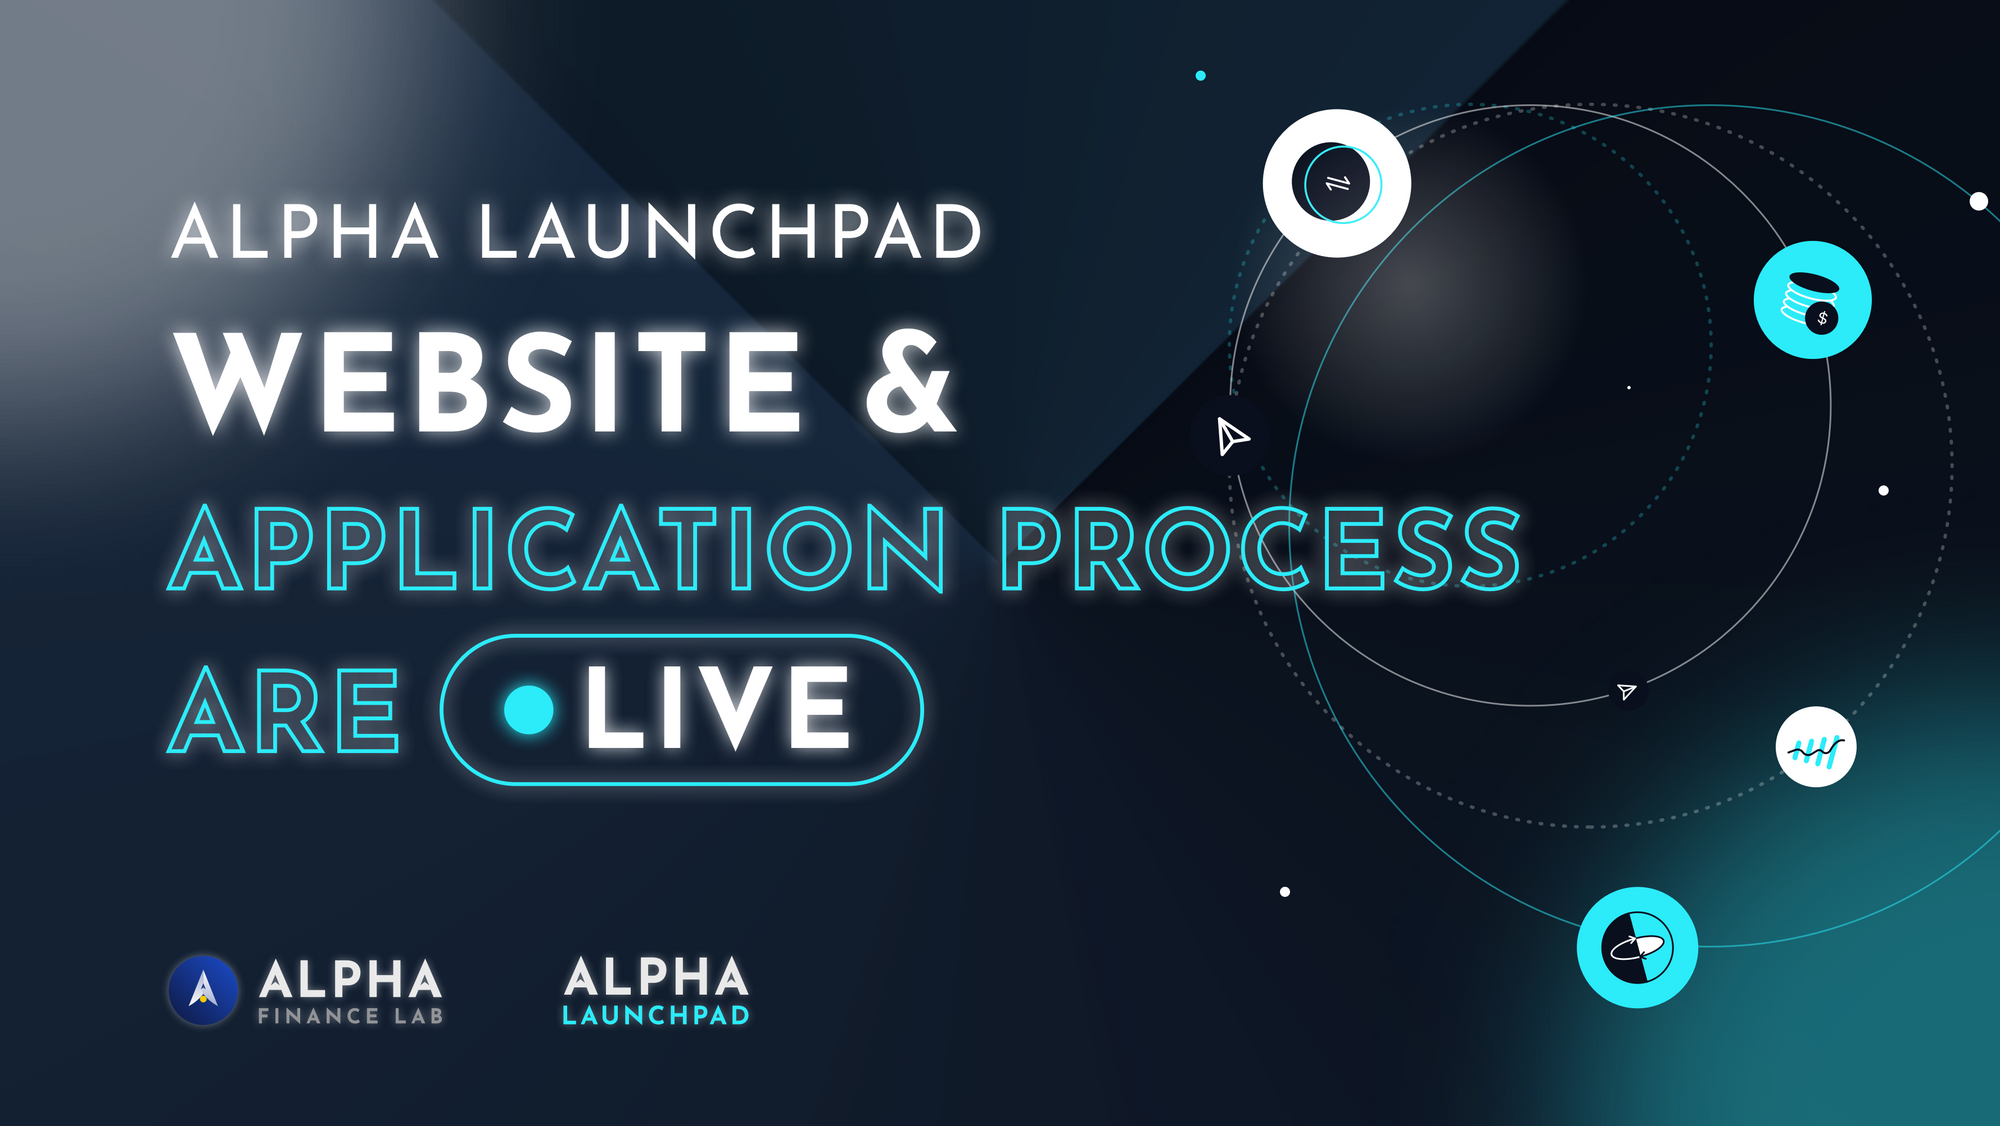 Alpha Launchpad Website & Application Process Are Live